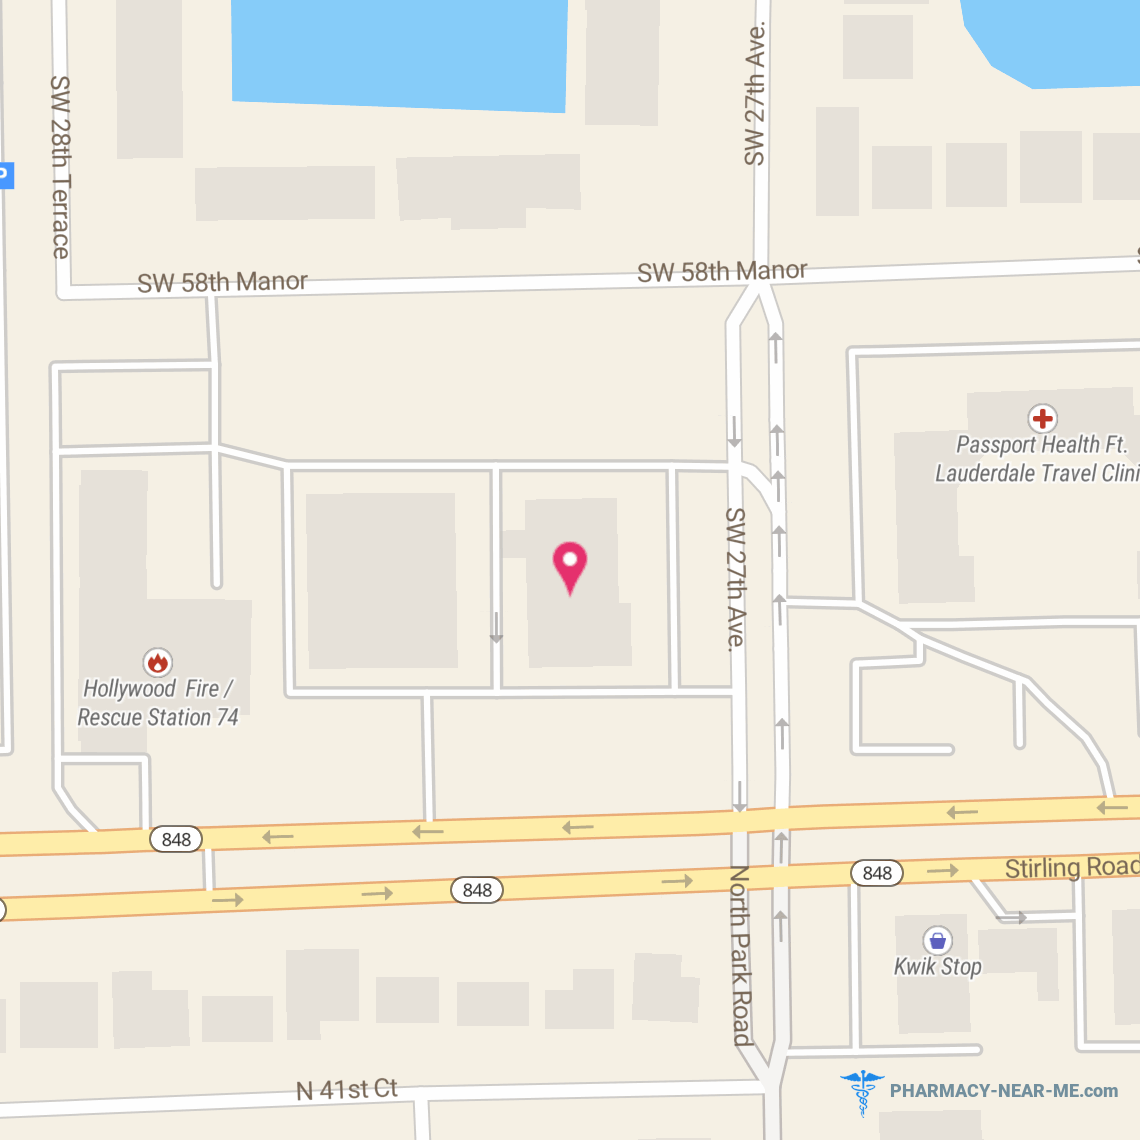 CVS PHARMACY 03261 - Pharmacy Hours, Phone, Reviews & Information: 2701 Stirling Rd, Fort Lauderdale, FL 33312, USA